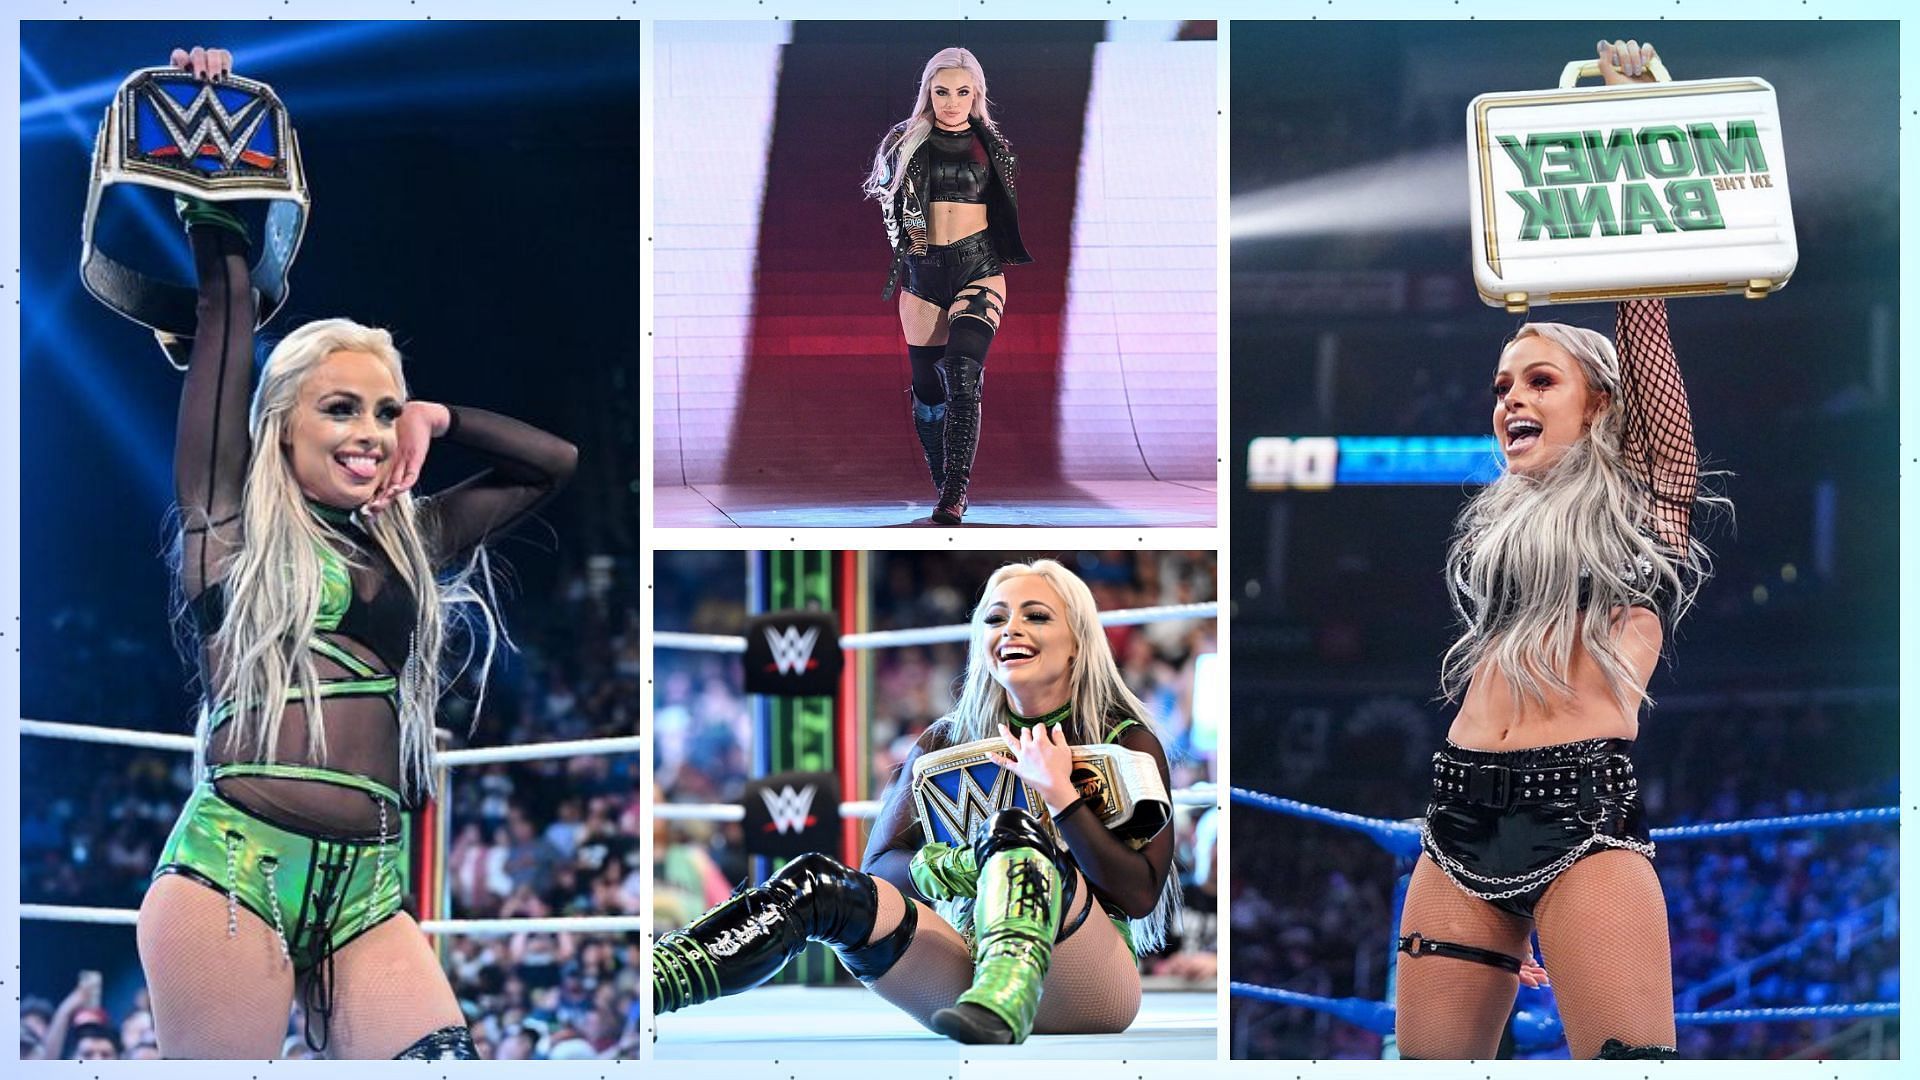 Liv advertised her next nonwrestling appearance for WWE